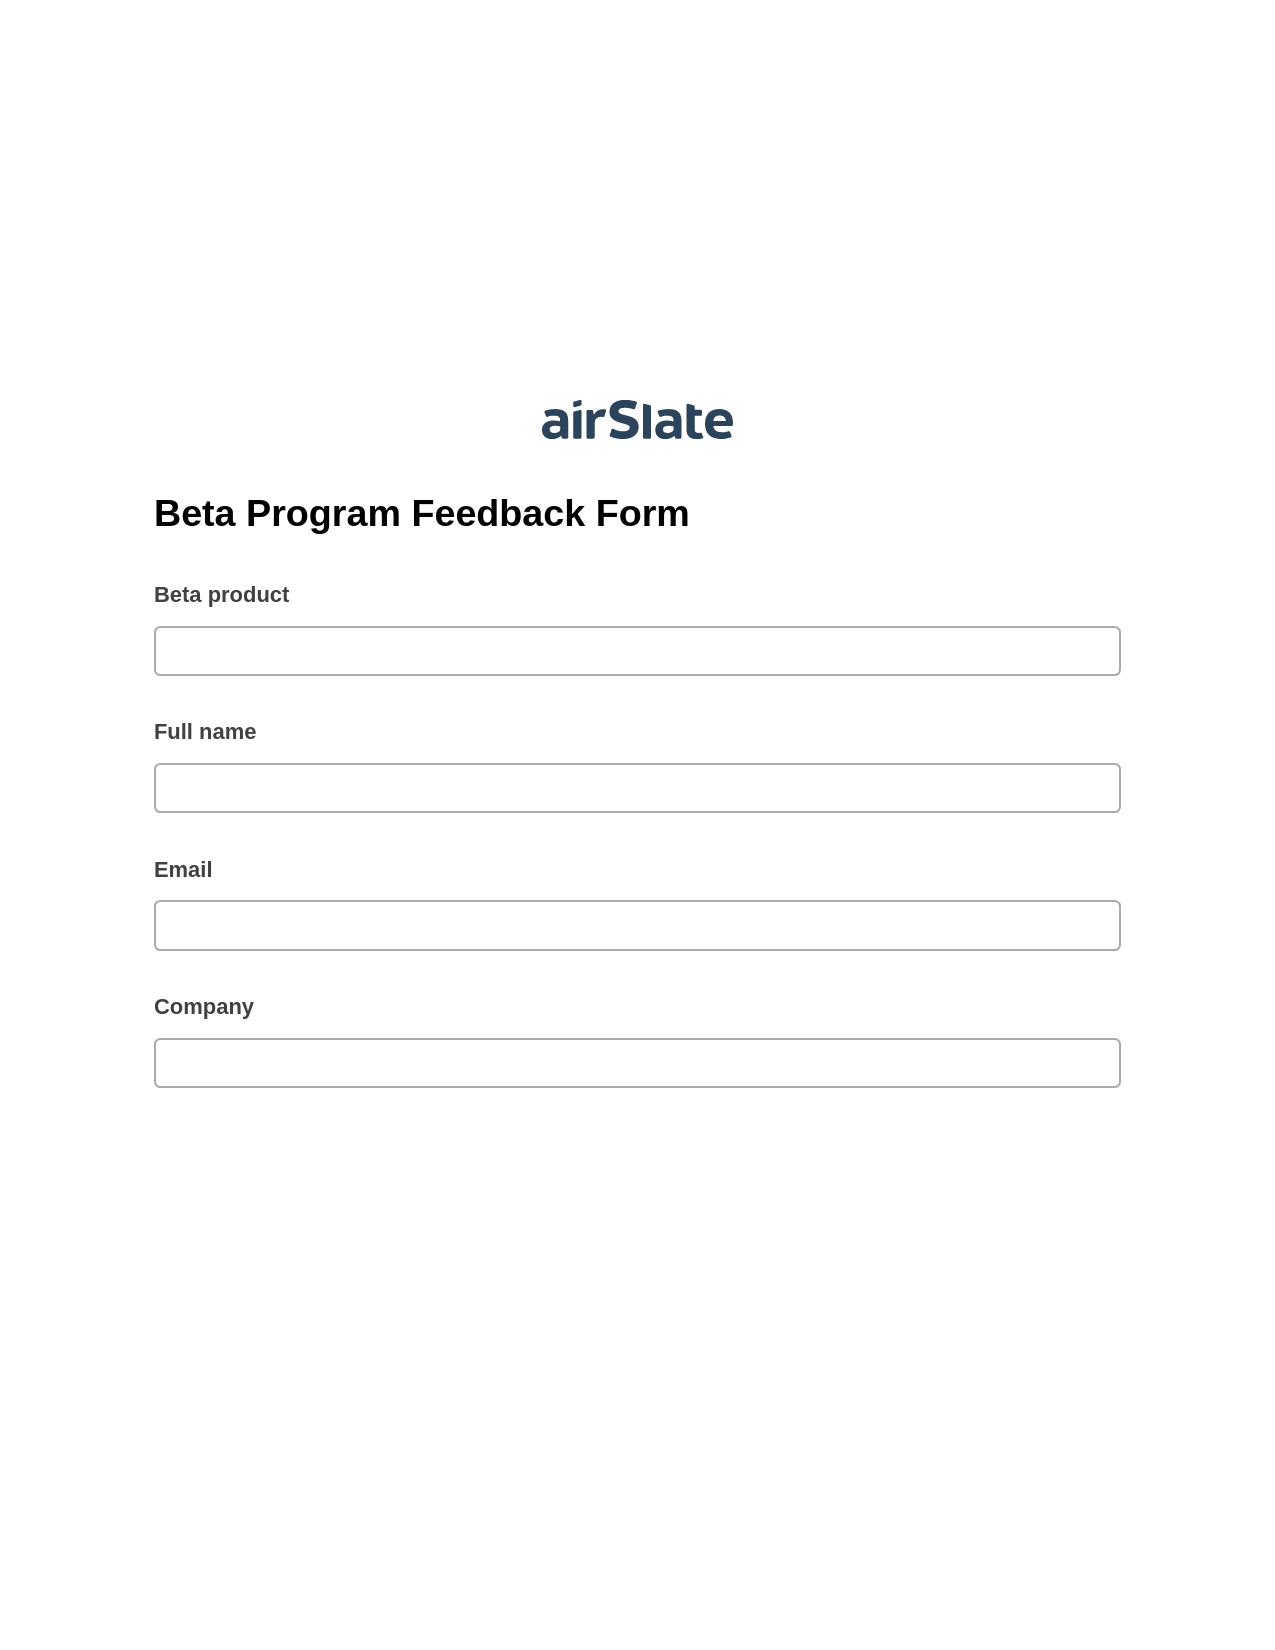 Multirole Beta Program Feedback Form Pre-fill Dropdown from Airtable, Open as Role Bot, OneDrive Bot